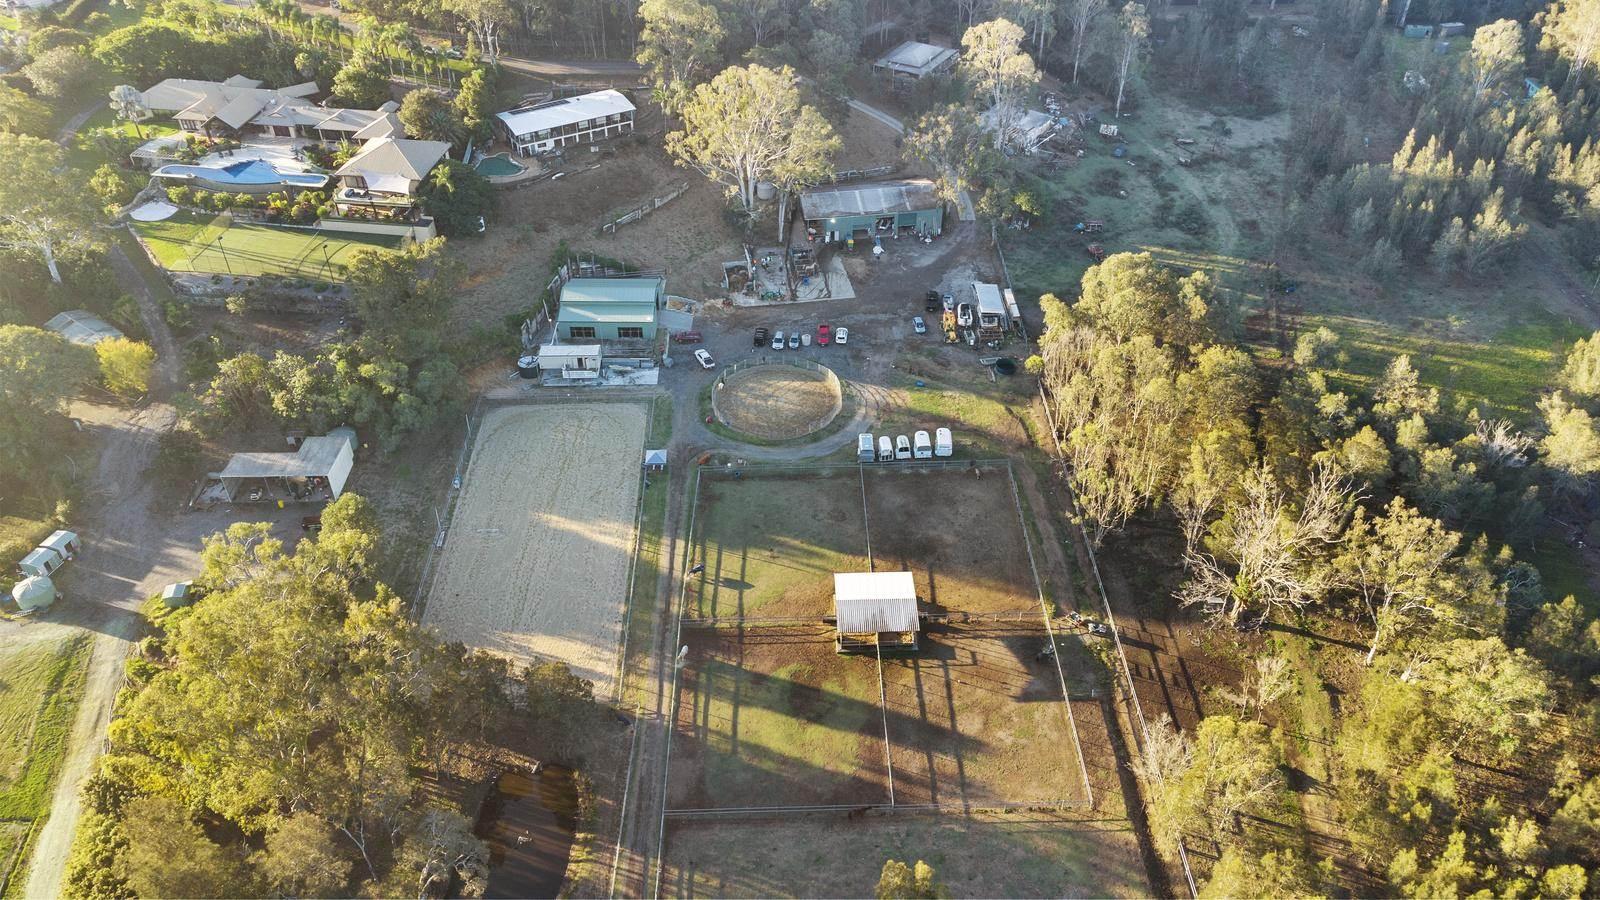 Horse Property for Sale QLD